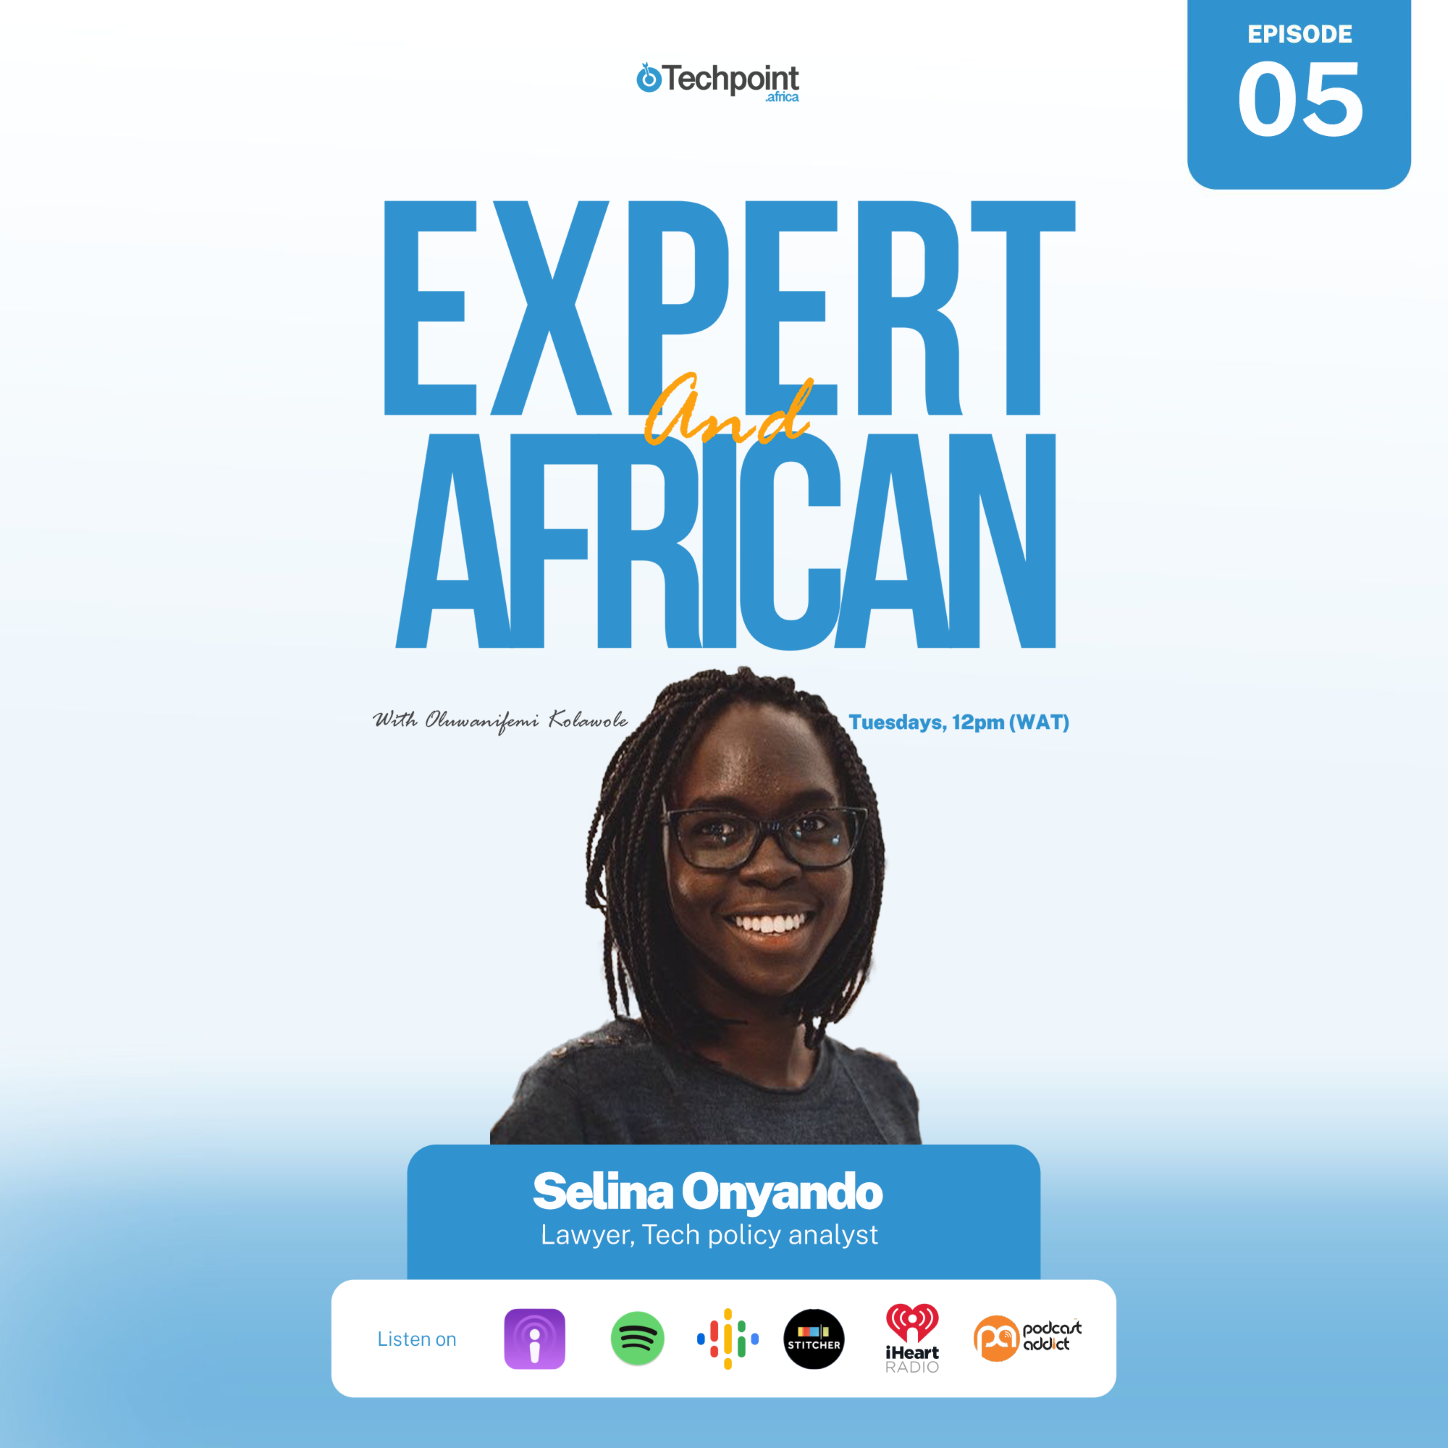 Selina Onyando: African Tech policy analyst